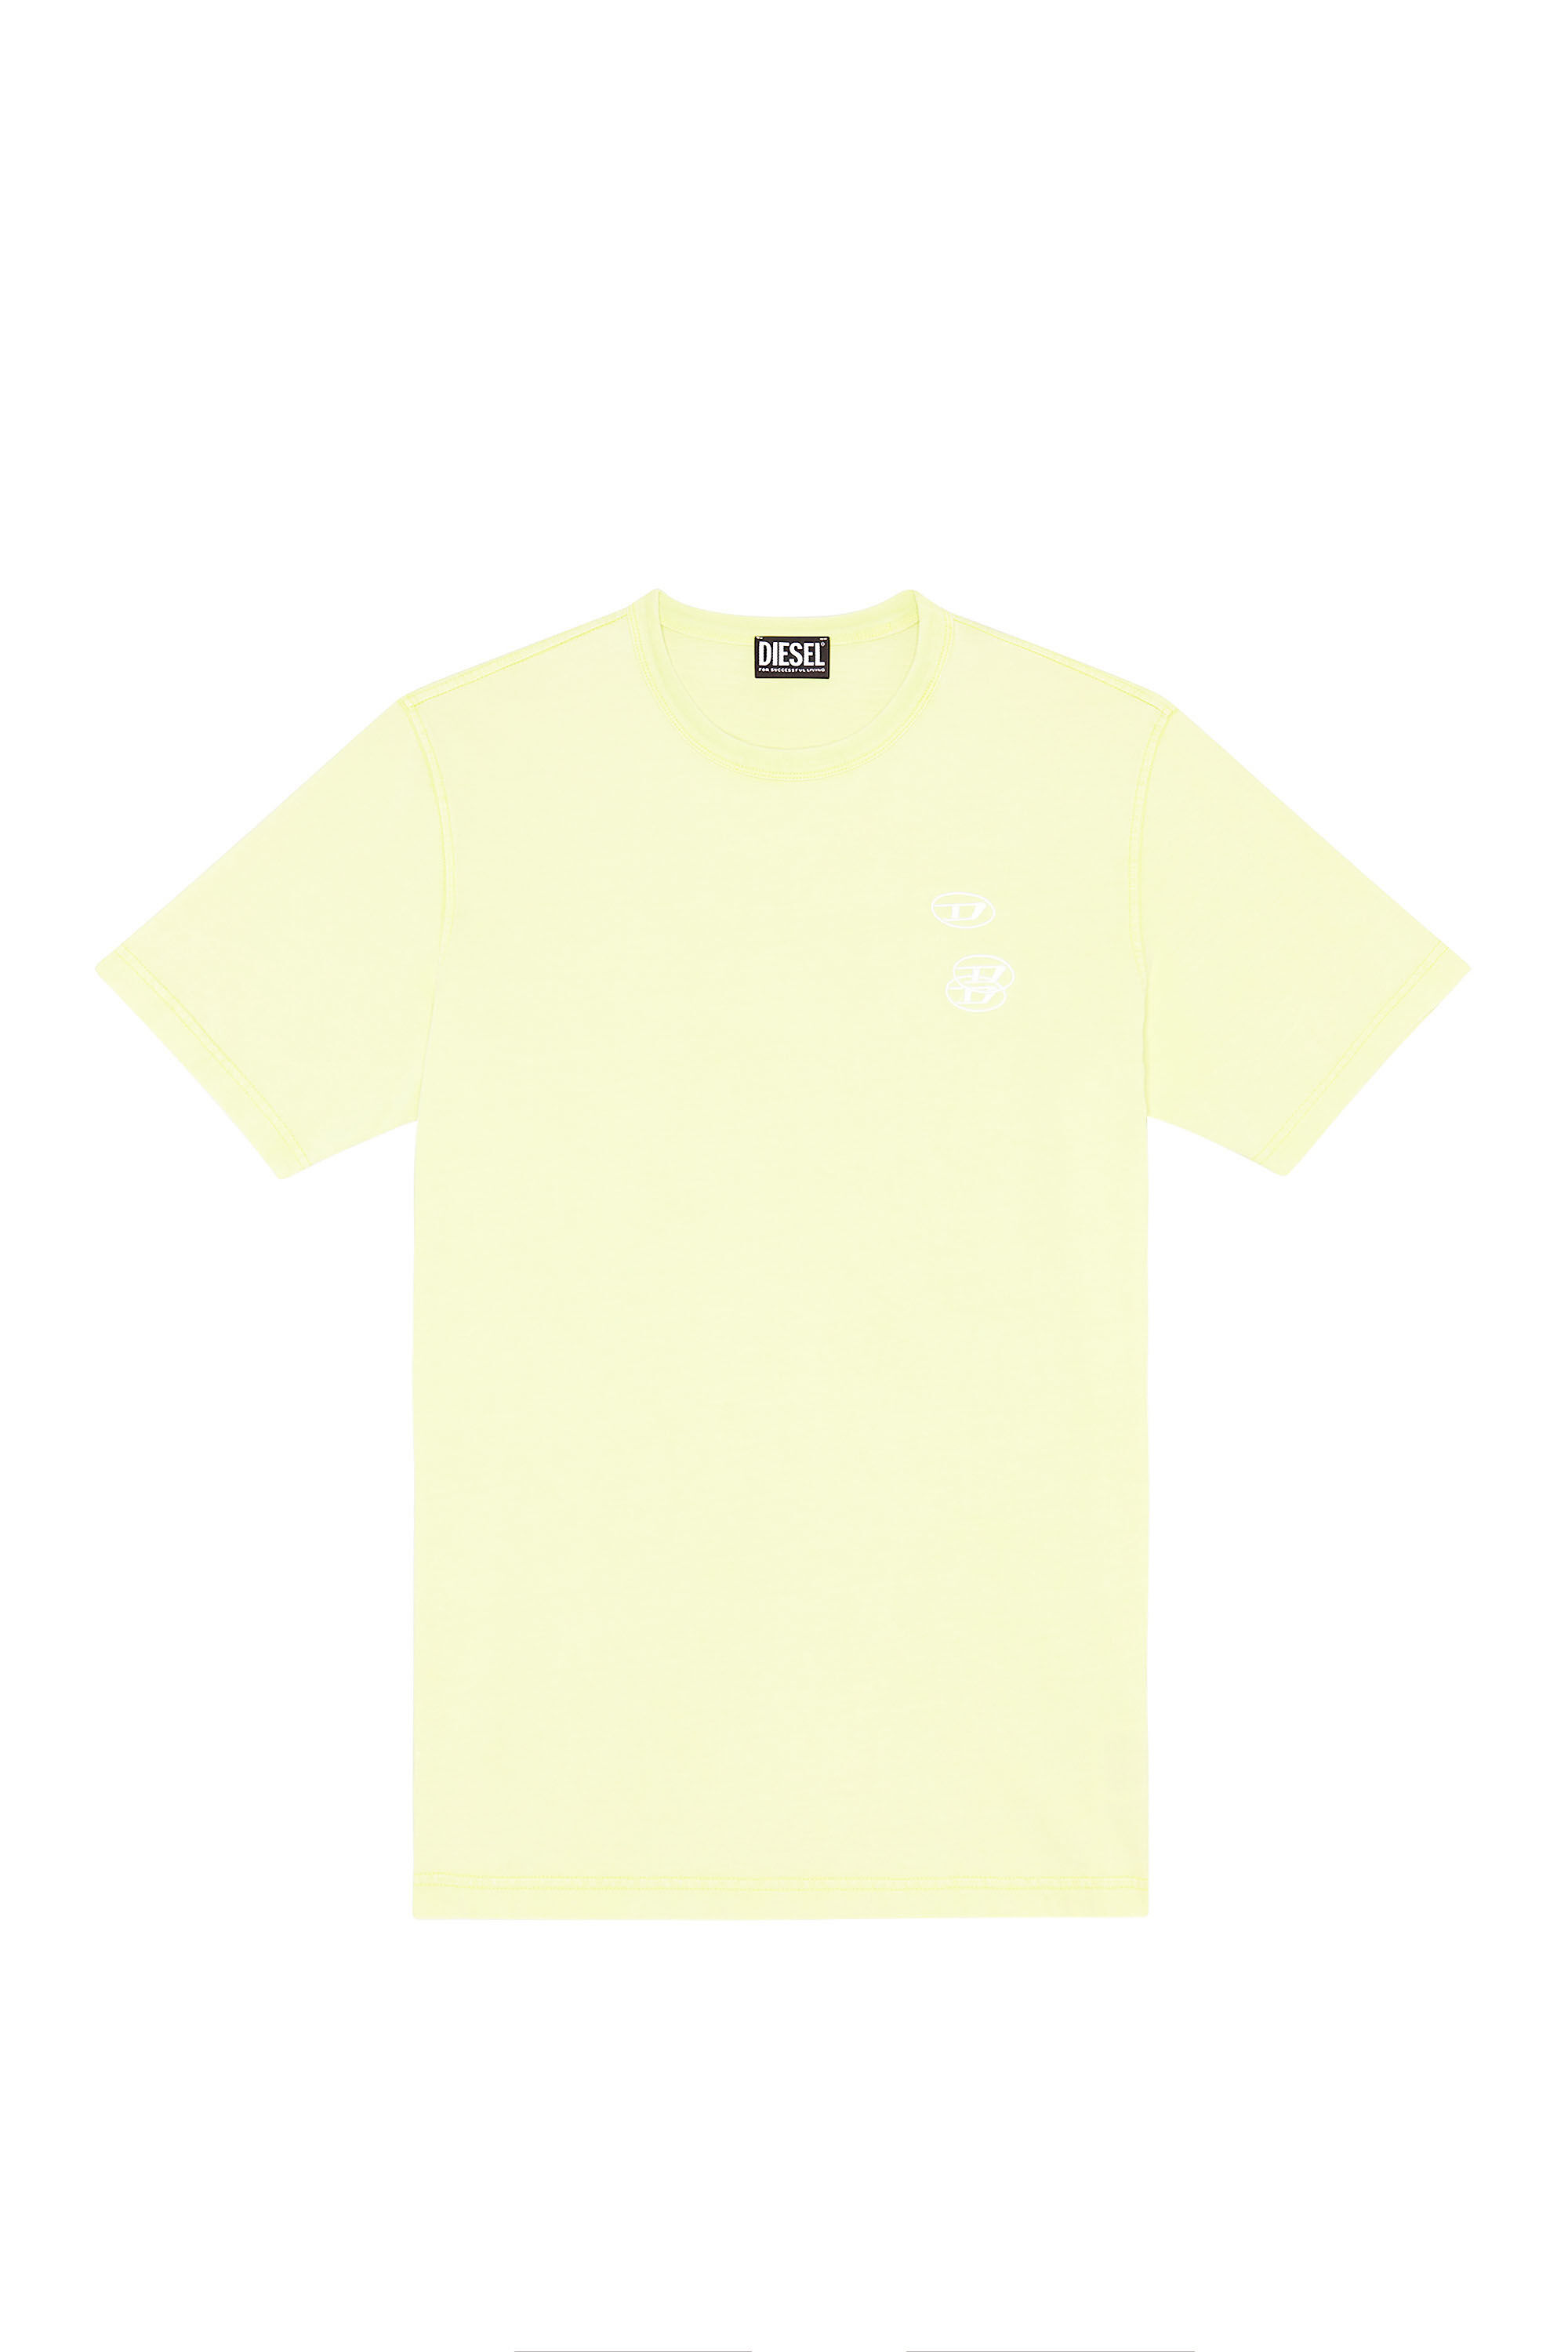 Diesel - T-JUST-G14, Giallo Fluo - Image 2